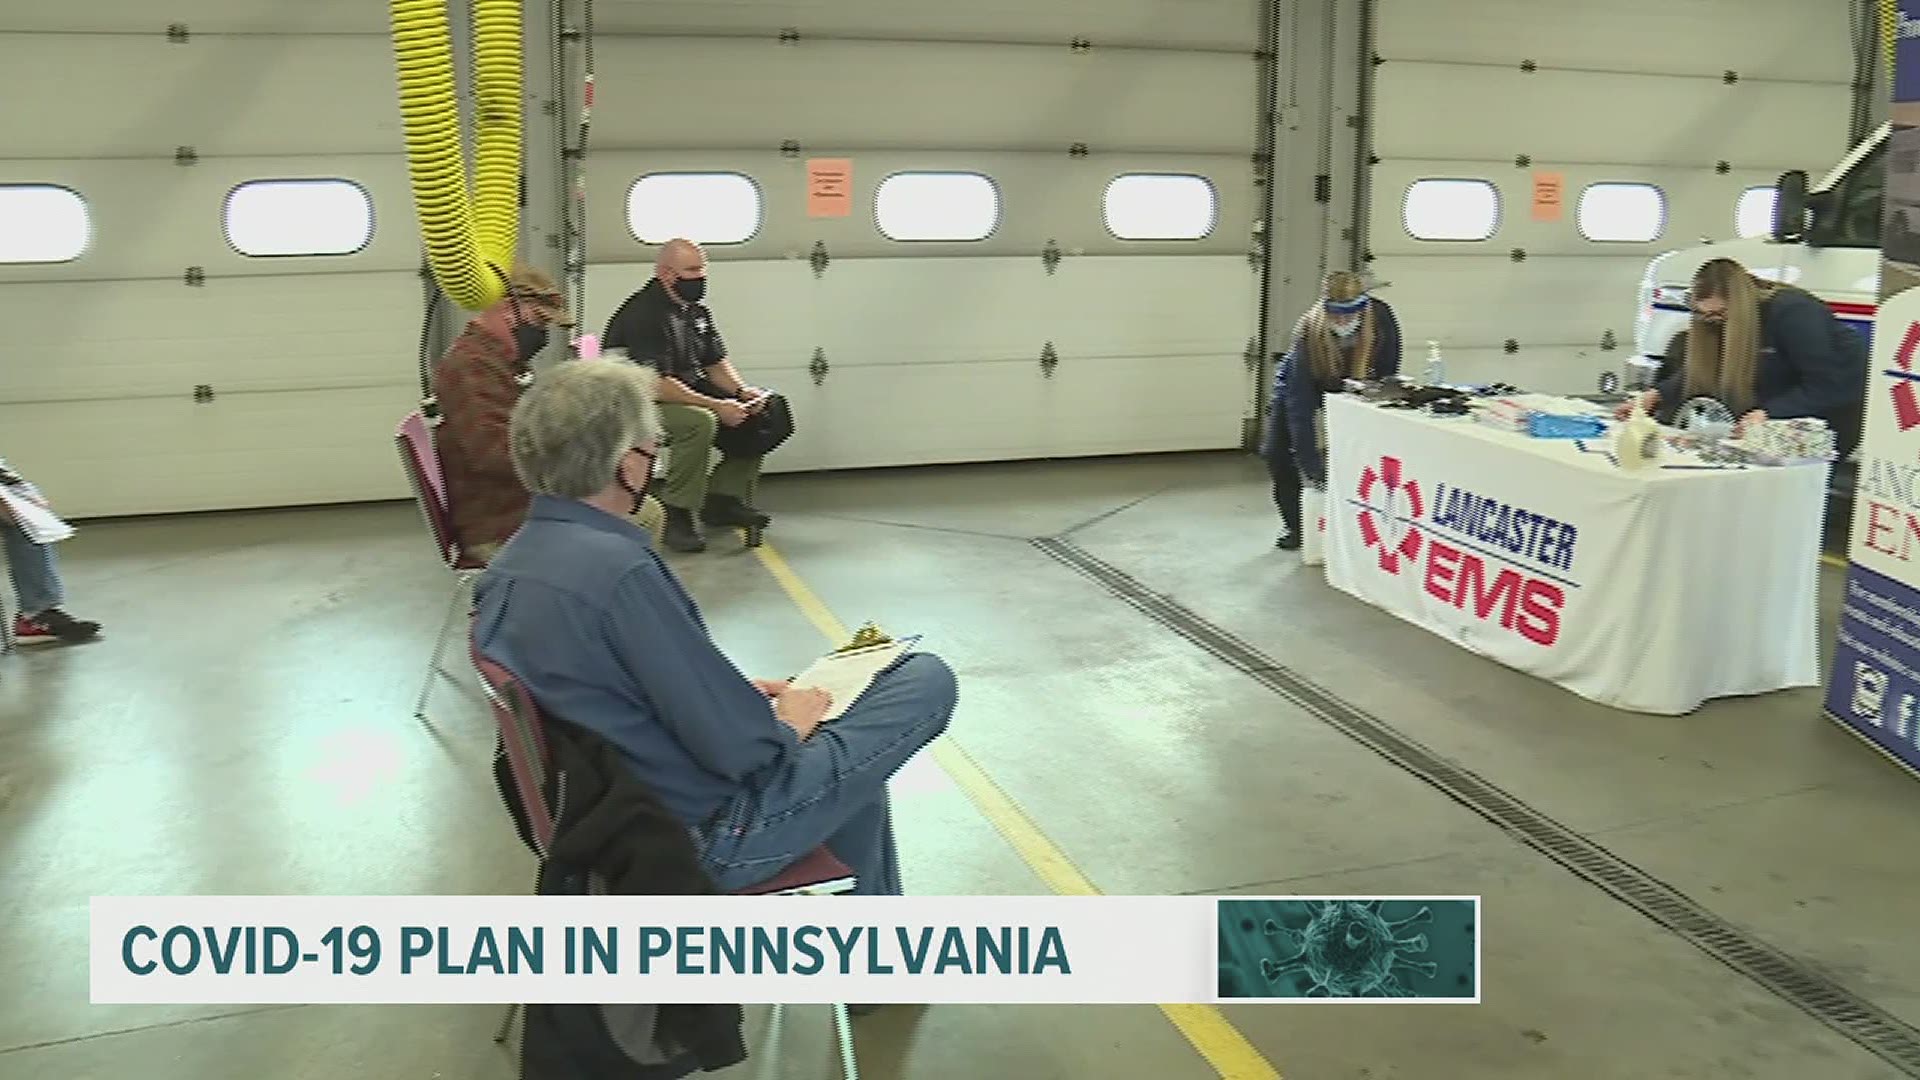 "The limiting factor with all of this is the supply chain of vaccine," said Pennsylvania's Emergency Management Agency Executive Deputy Director.